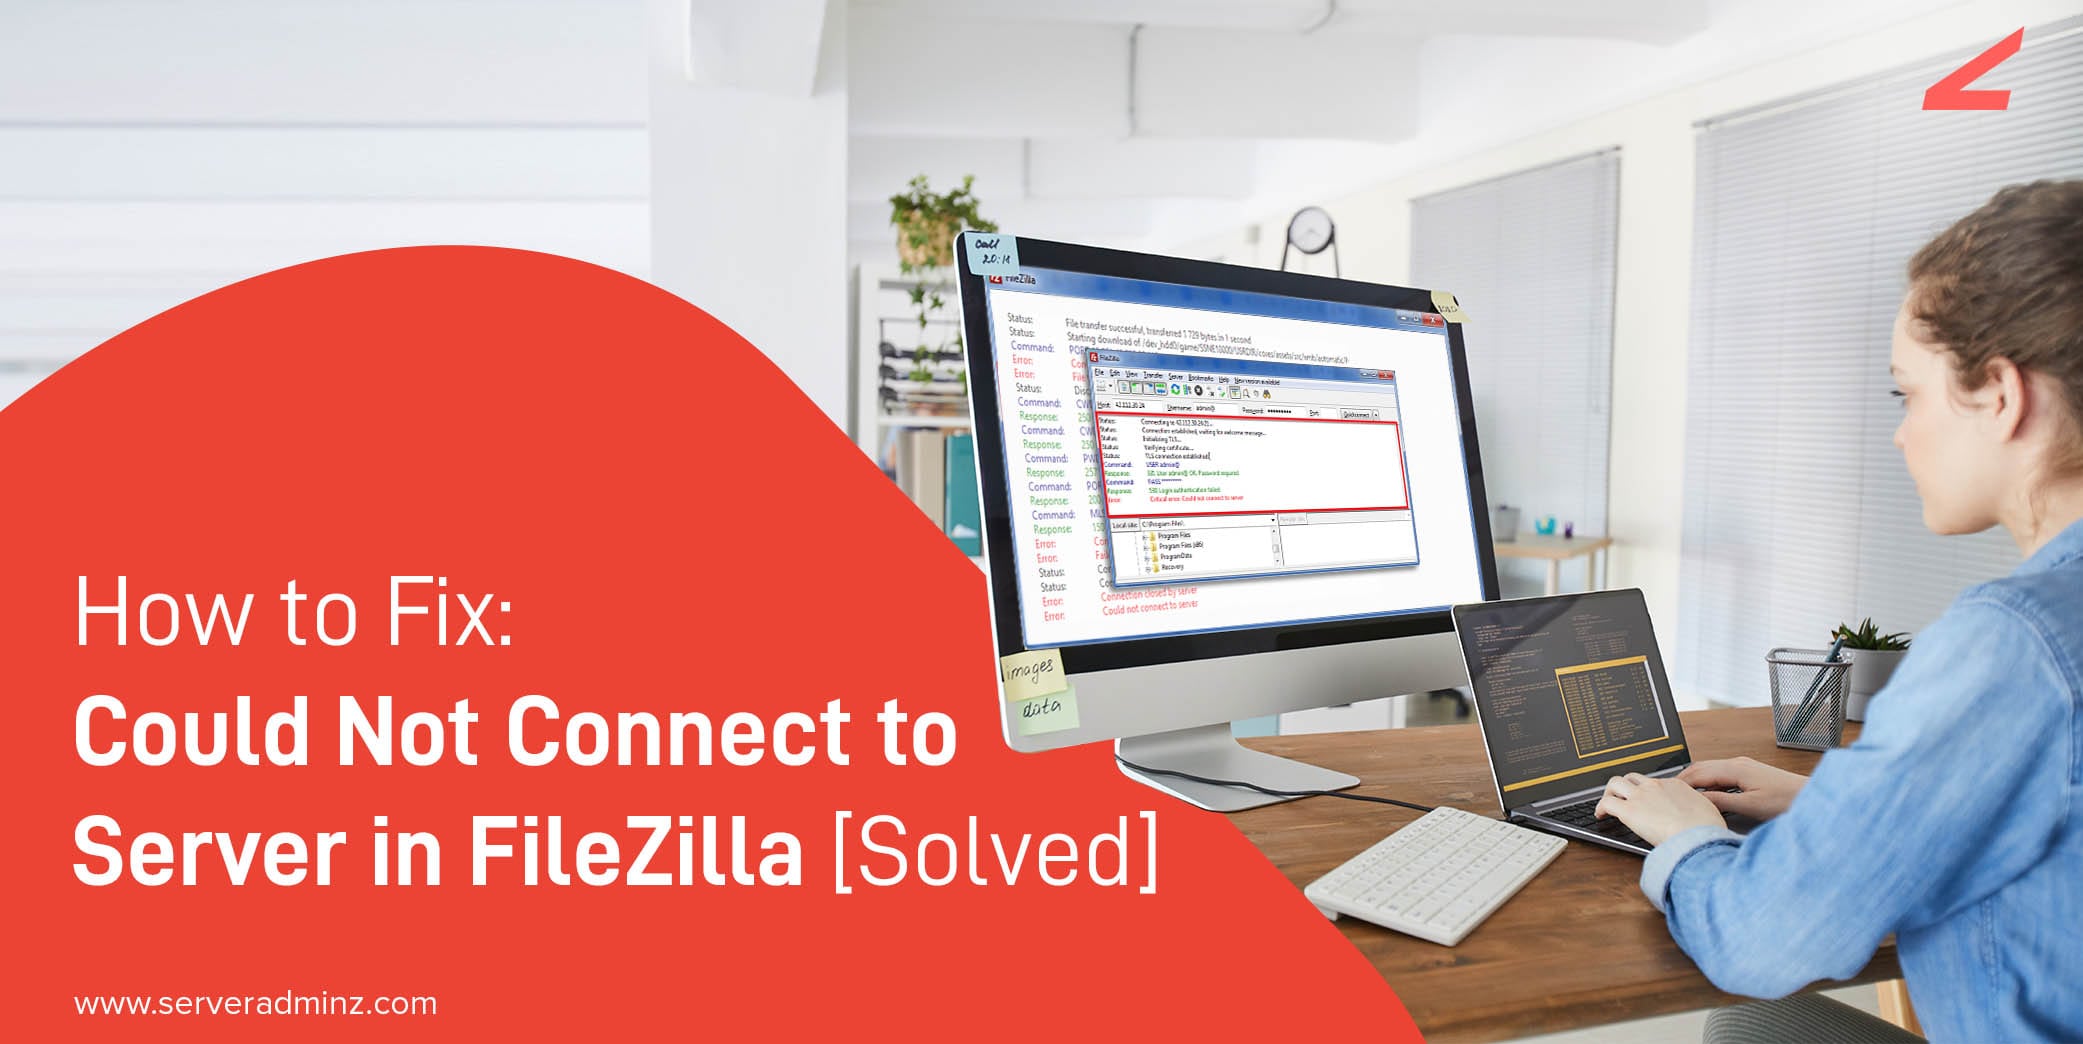 Could Not Connect to Server in FileZilla [Solved]